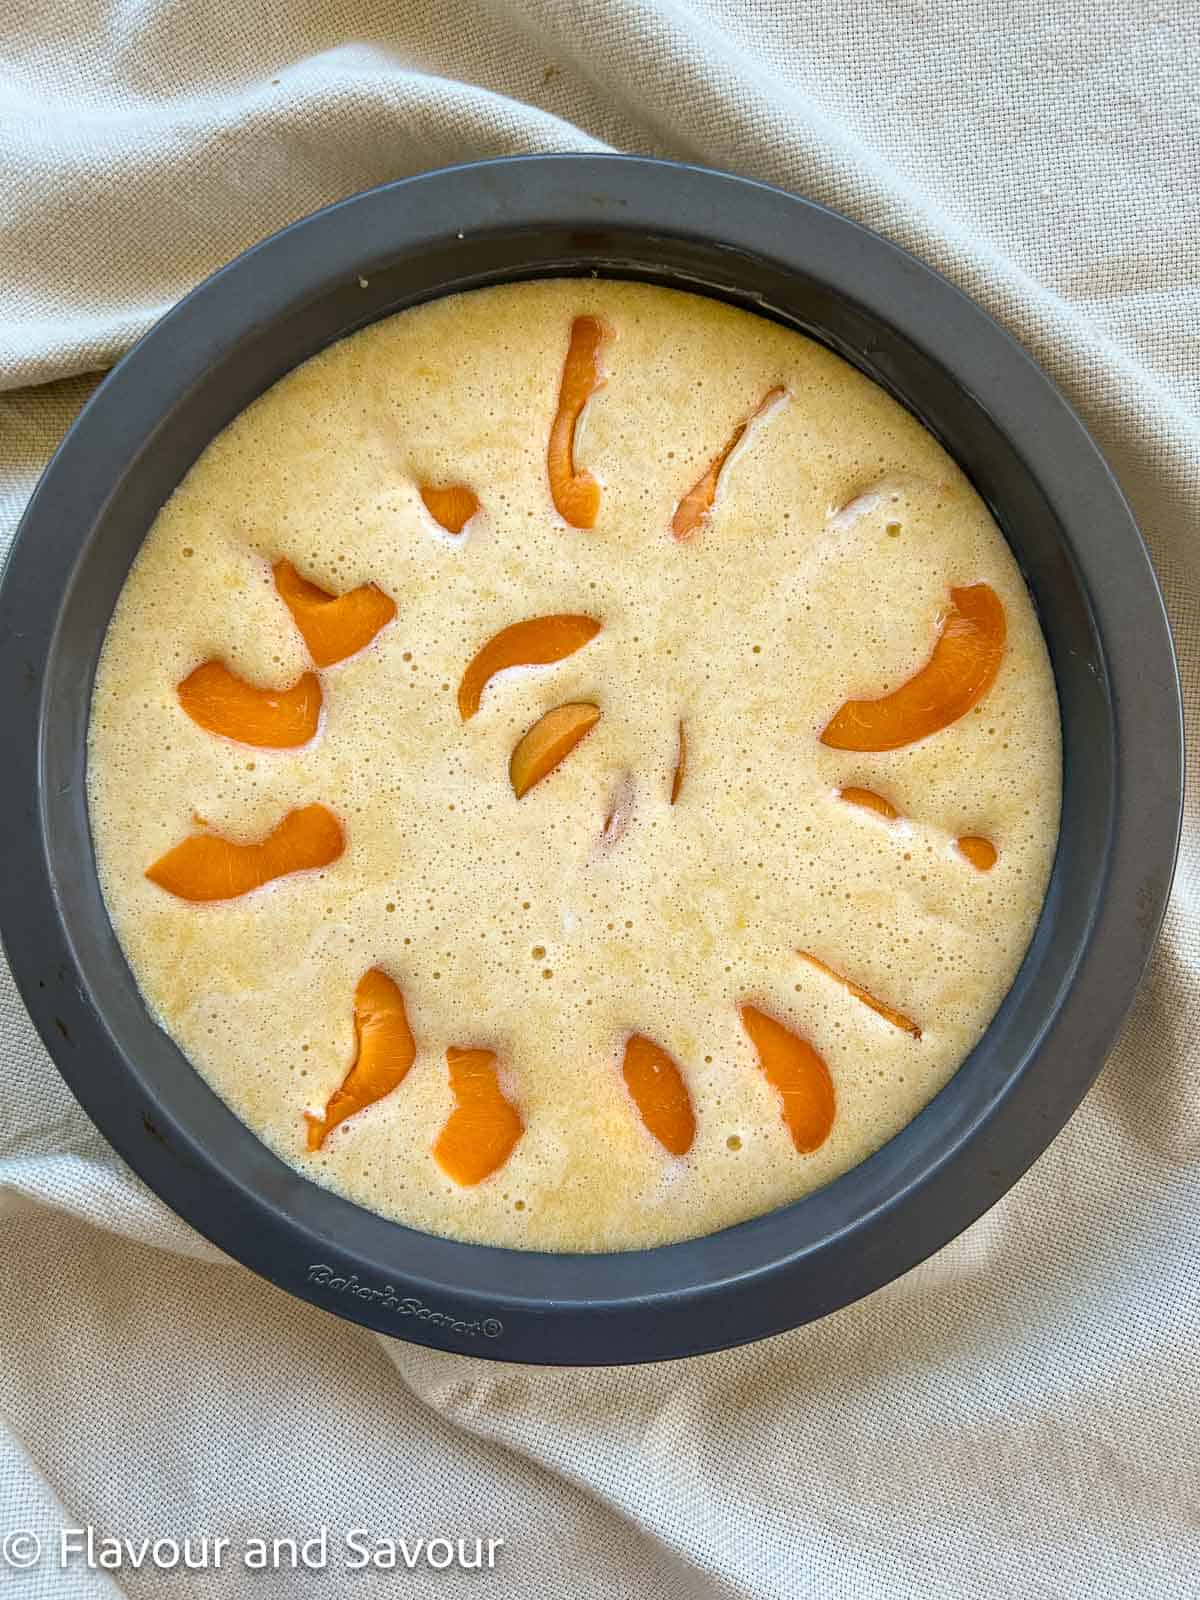 Sliced apricots in apricot almond flour cake batter in a baking pan.